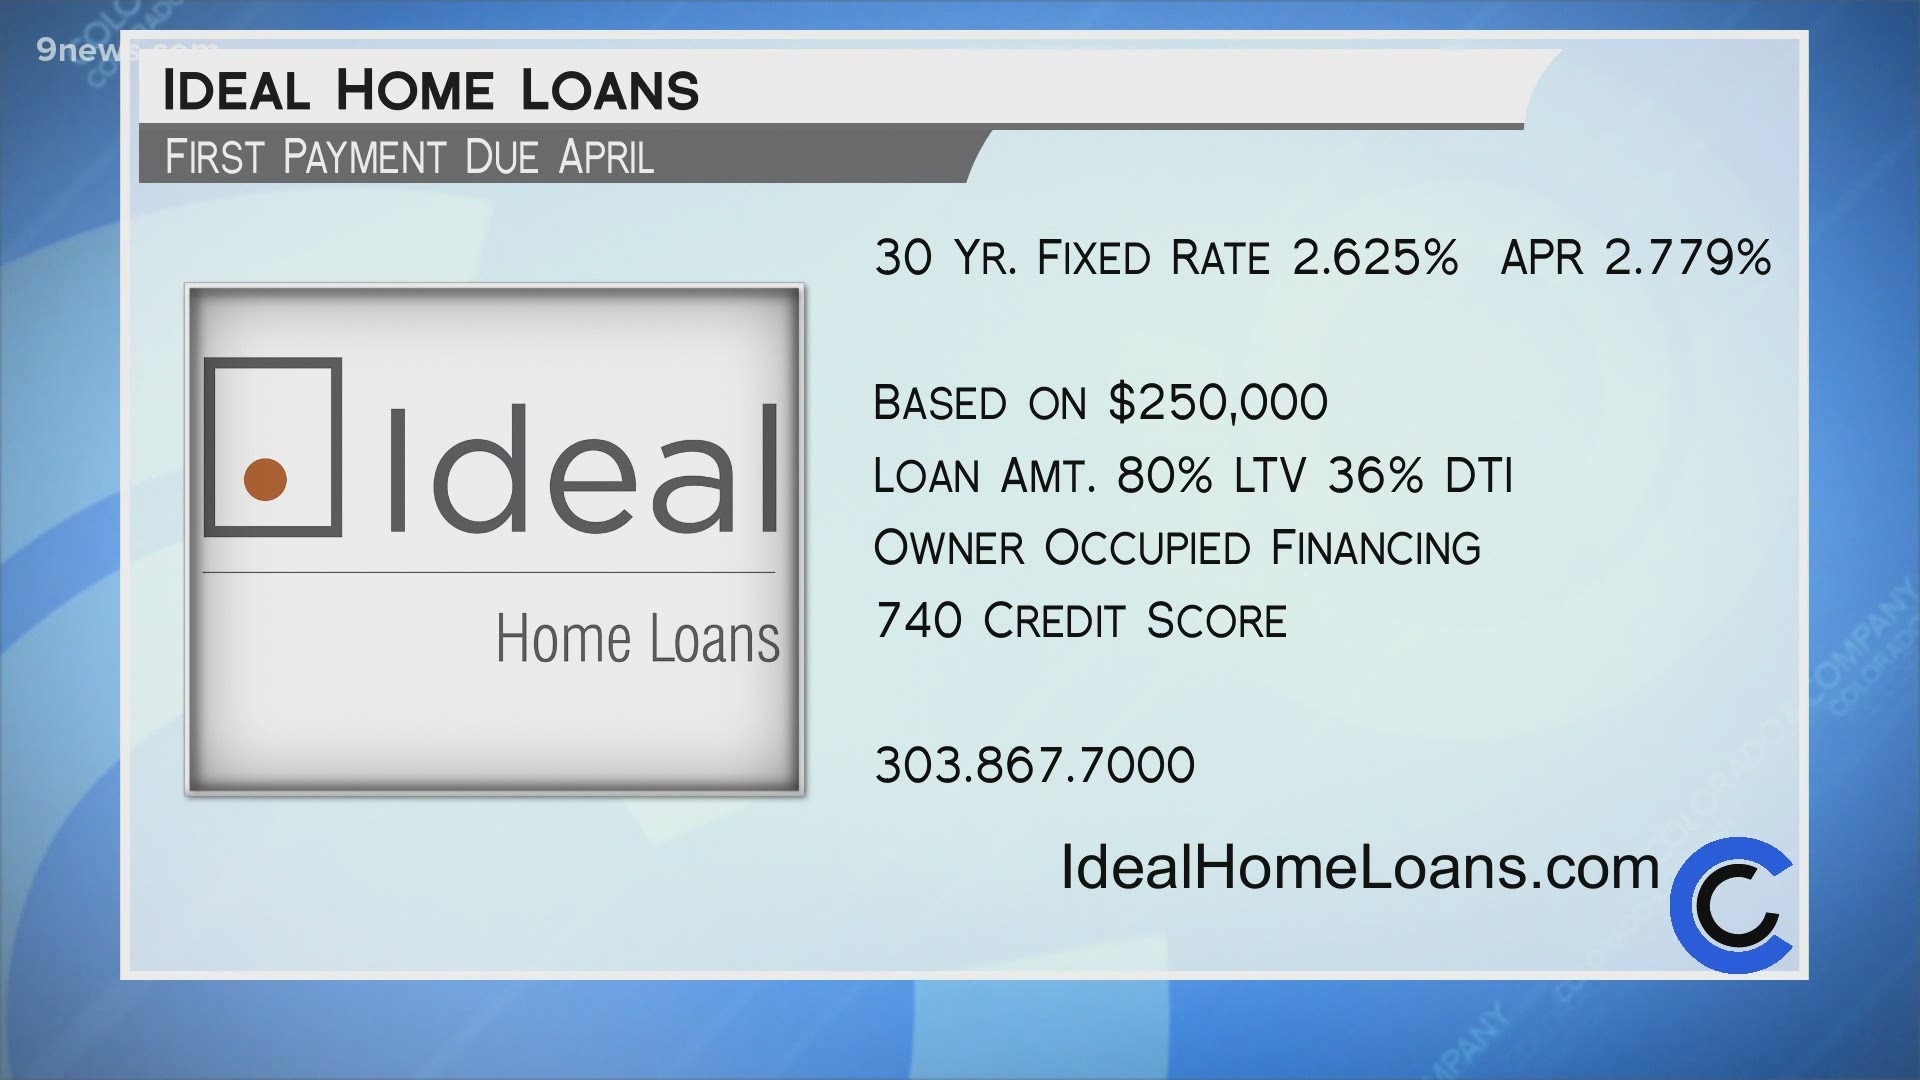 Call 303.867.7000 or visit IdealHomeLoans.com to schedule your free consultation.